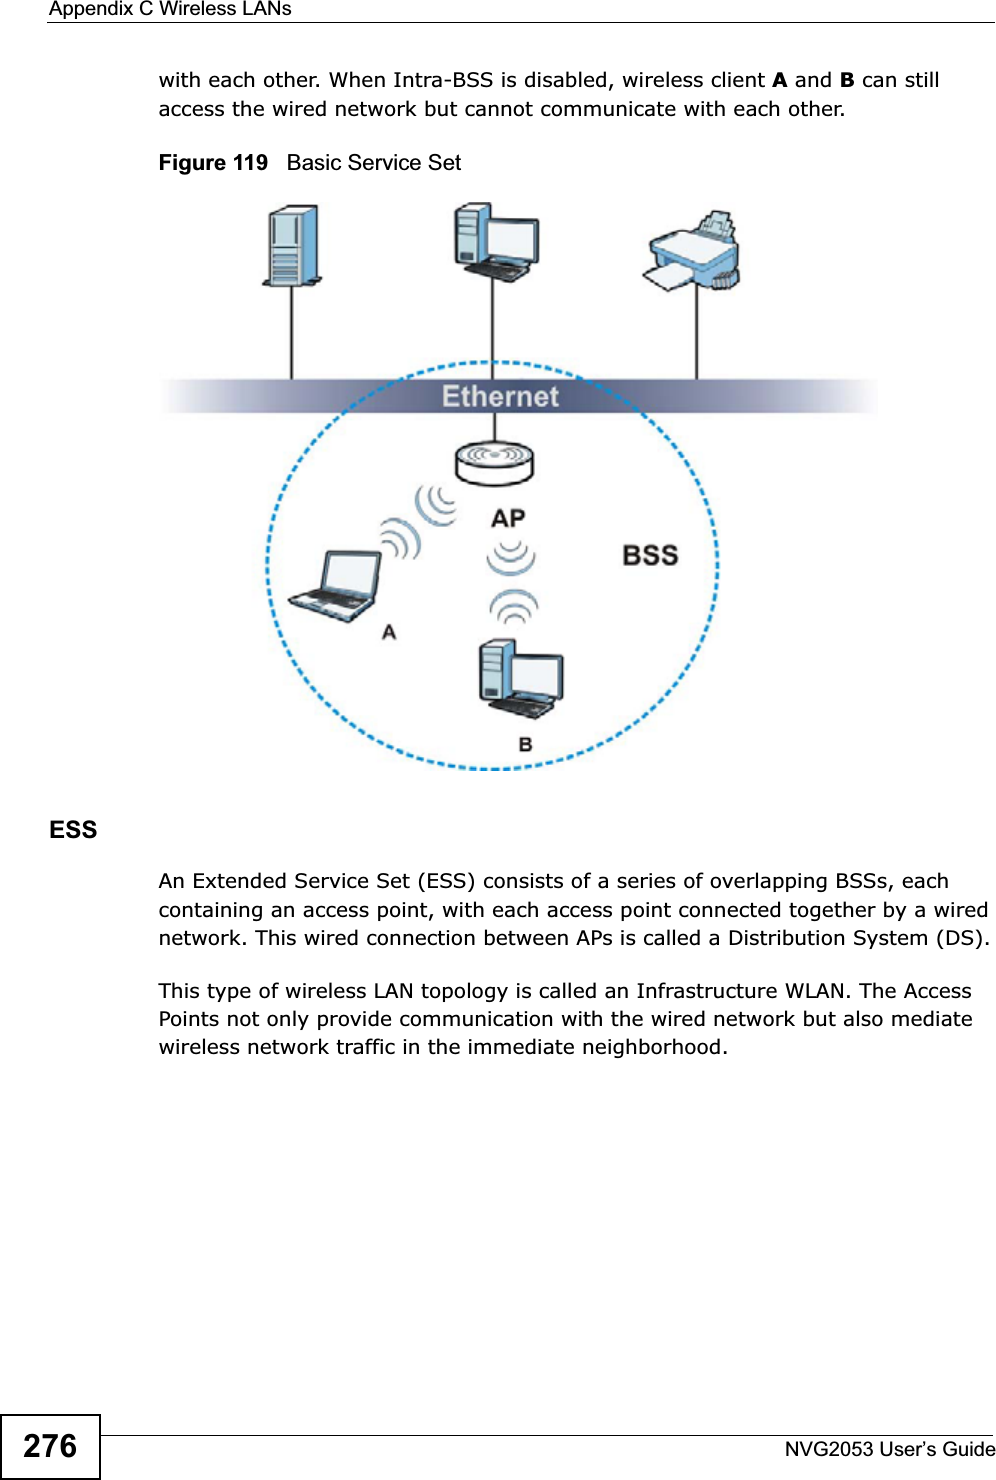 Appendix C Wireless LANsNVG2053 User’s Guide276with each other. When Intra-BSS is disabled, wireless client A and B can still access the wired network but cannot communicate with each other.Figure 119   Basic Service SetESSAn Extended Service Set (ESS) consists of a series of overlapping BSSs, each containing an access point, with each access point connected together by a wired network. This wired connection between APs is called a Distribution System (DS).This type of wireless LAN topology is called an Infrastructure WLAN. The Access Points not only provide communication with the wired network but also mediate wireless network traffic in the immediate neighborhood. 